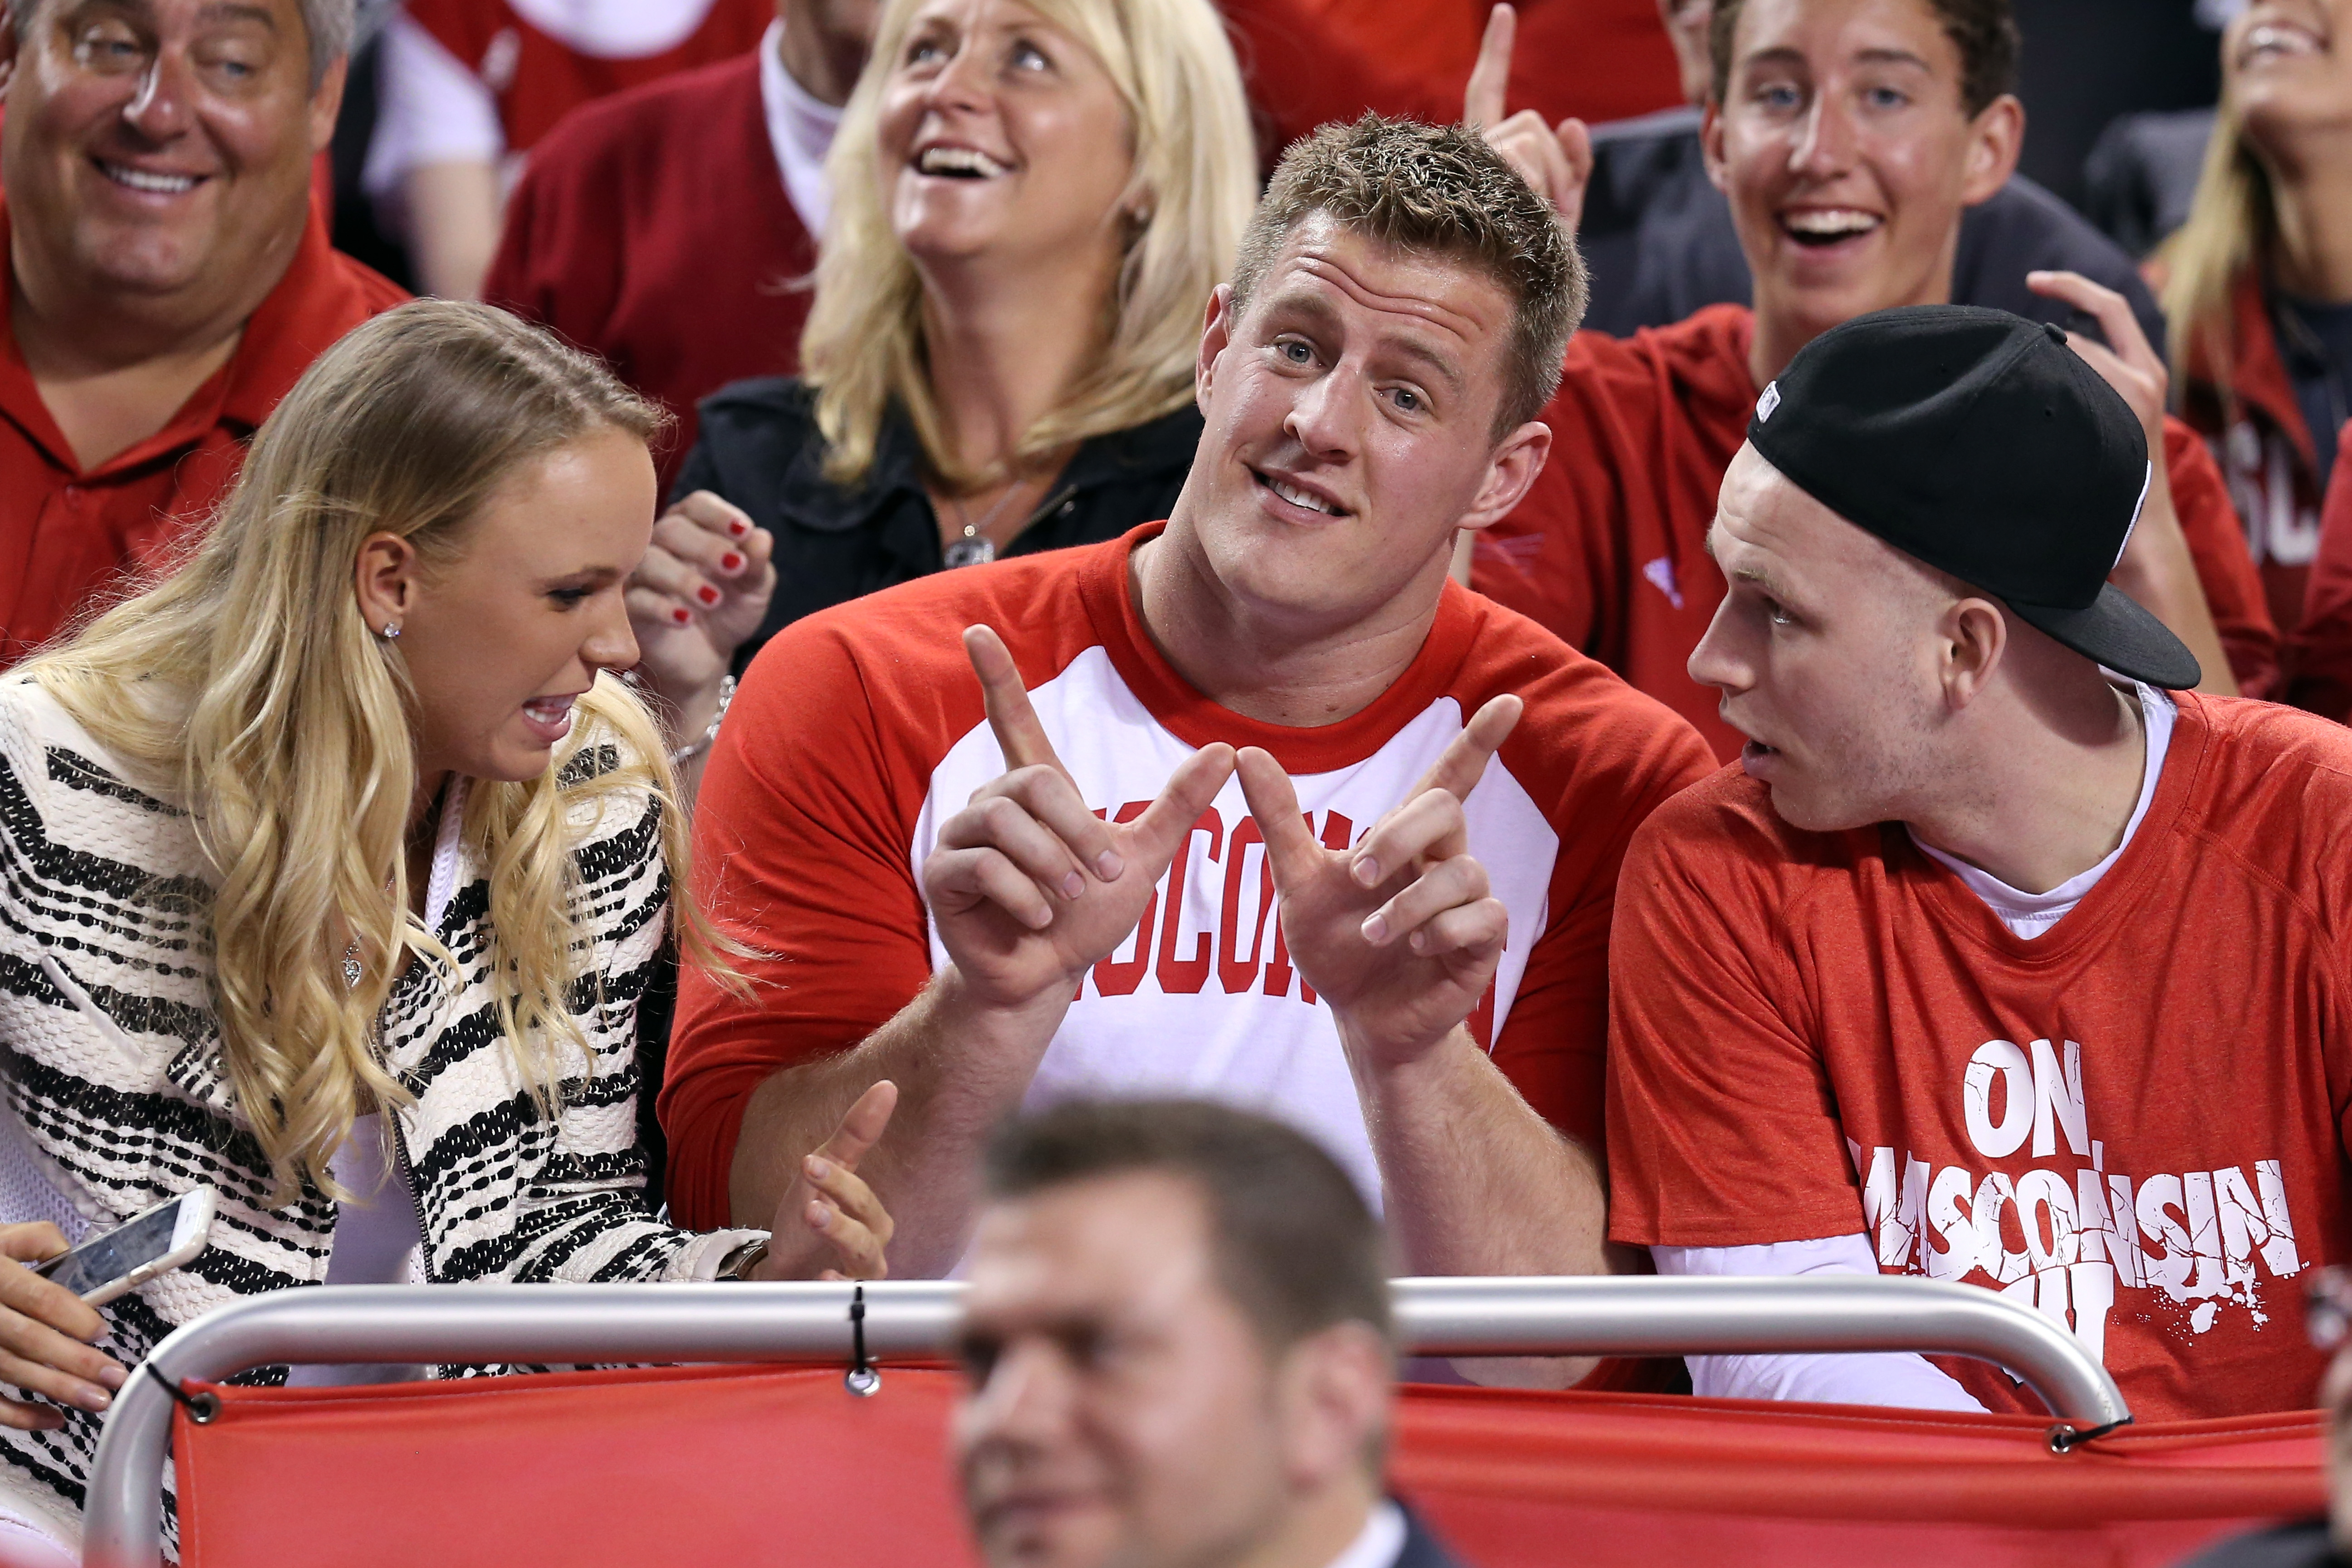 Hours After Playing Tennis At The White House Caroline Wozniacki Sat Next To J J Watt At The